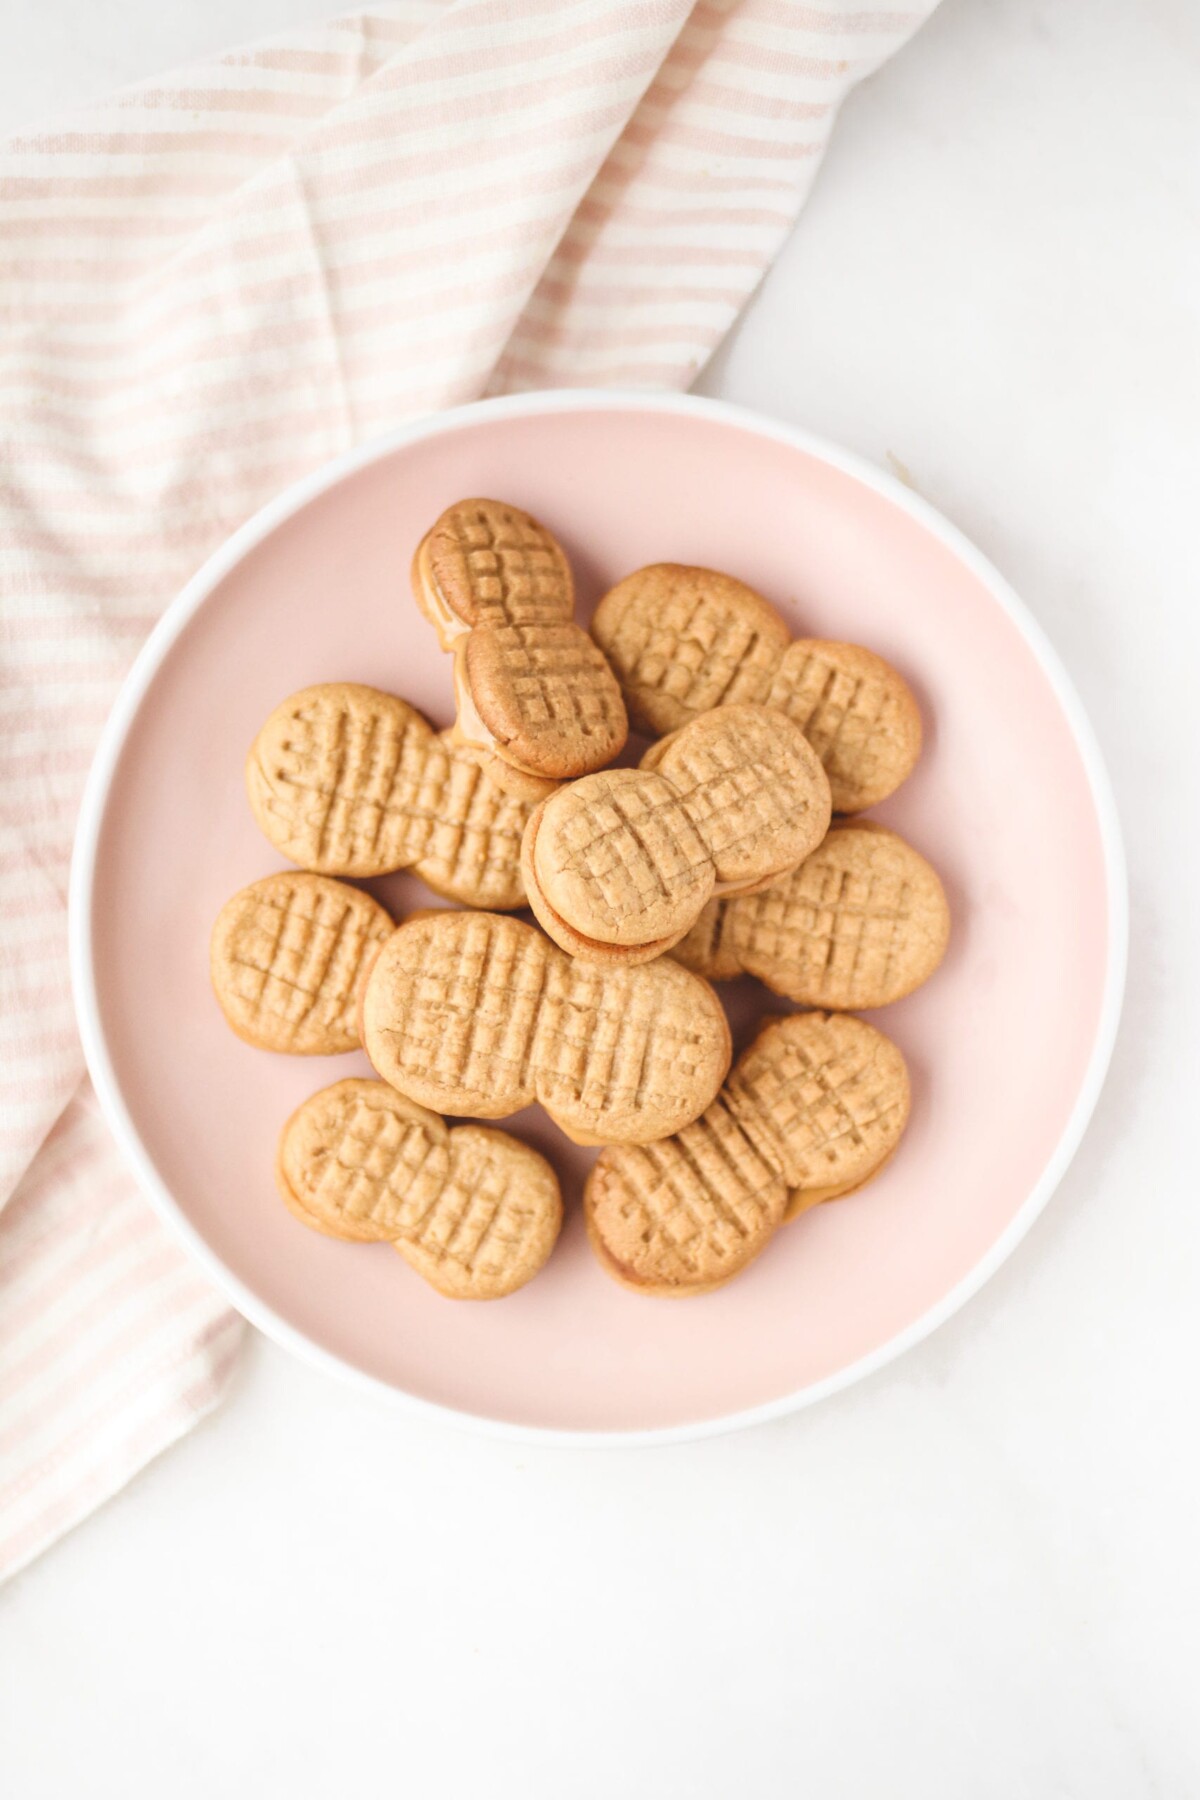 nutter butter cookies on a pink plate